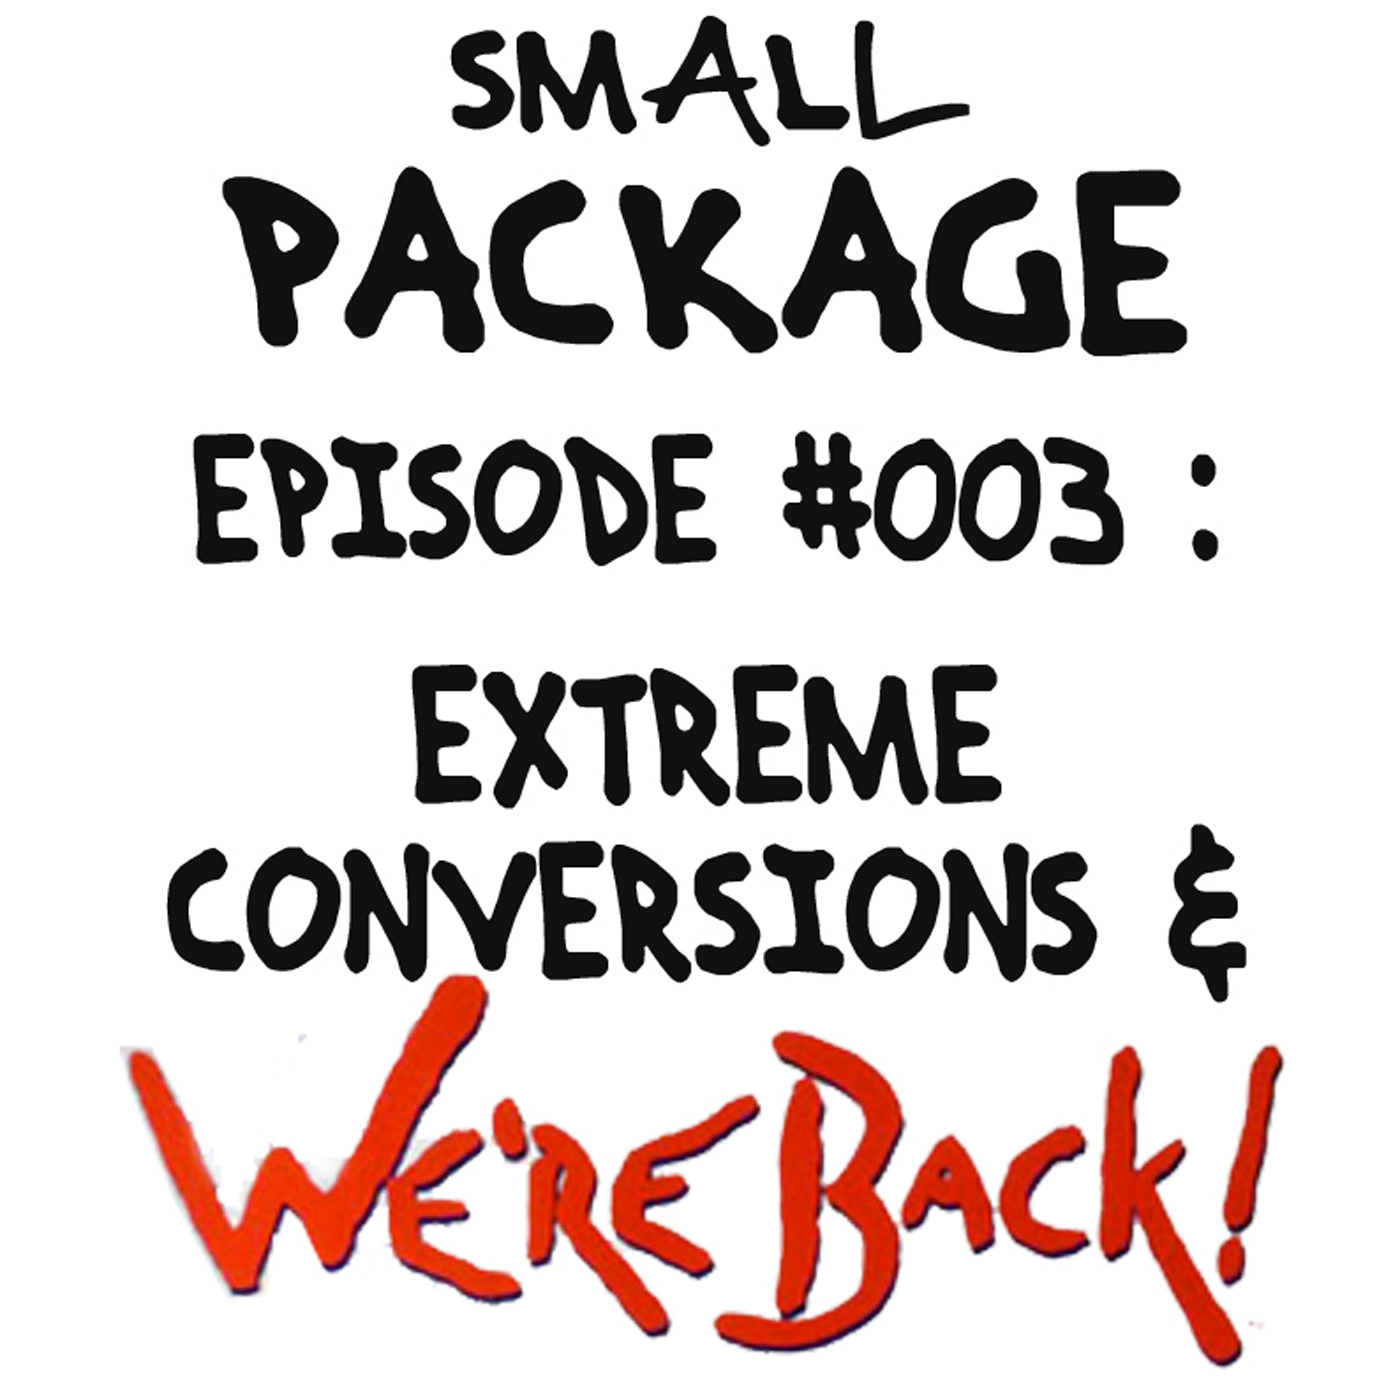 Episode 003: Extreme Conversions and WE'RE BACK! [05/20/16]